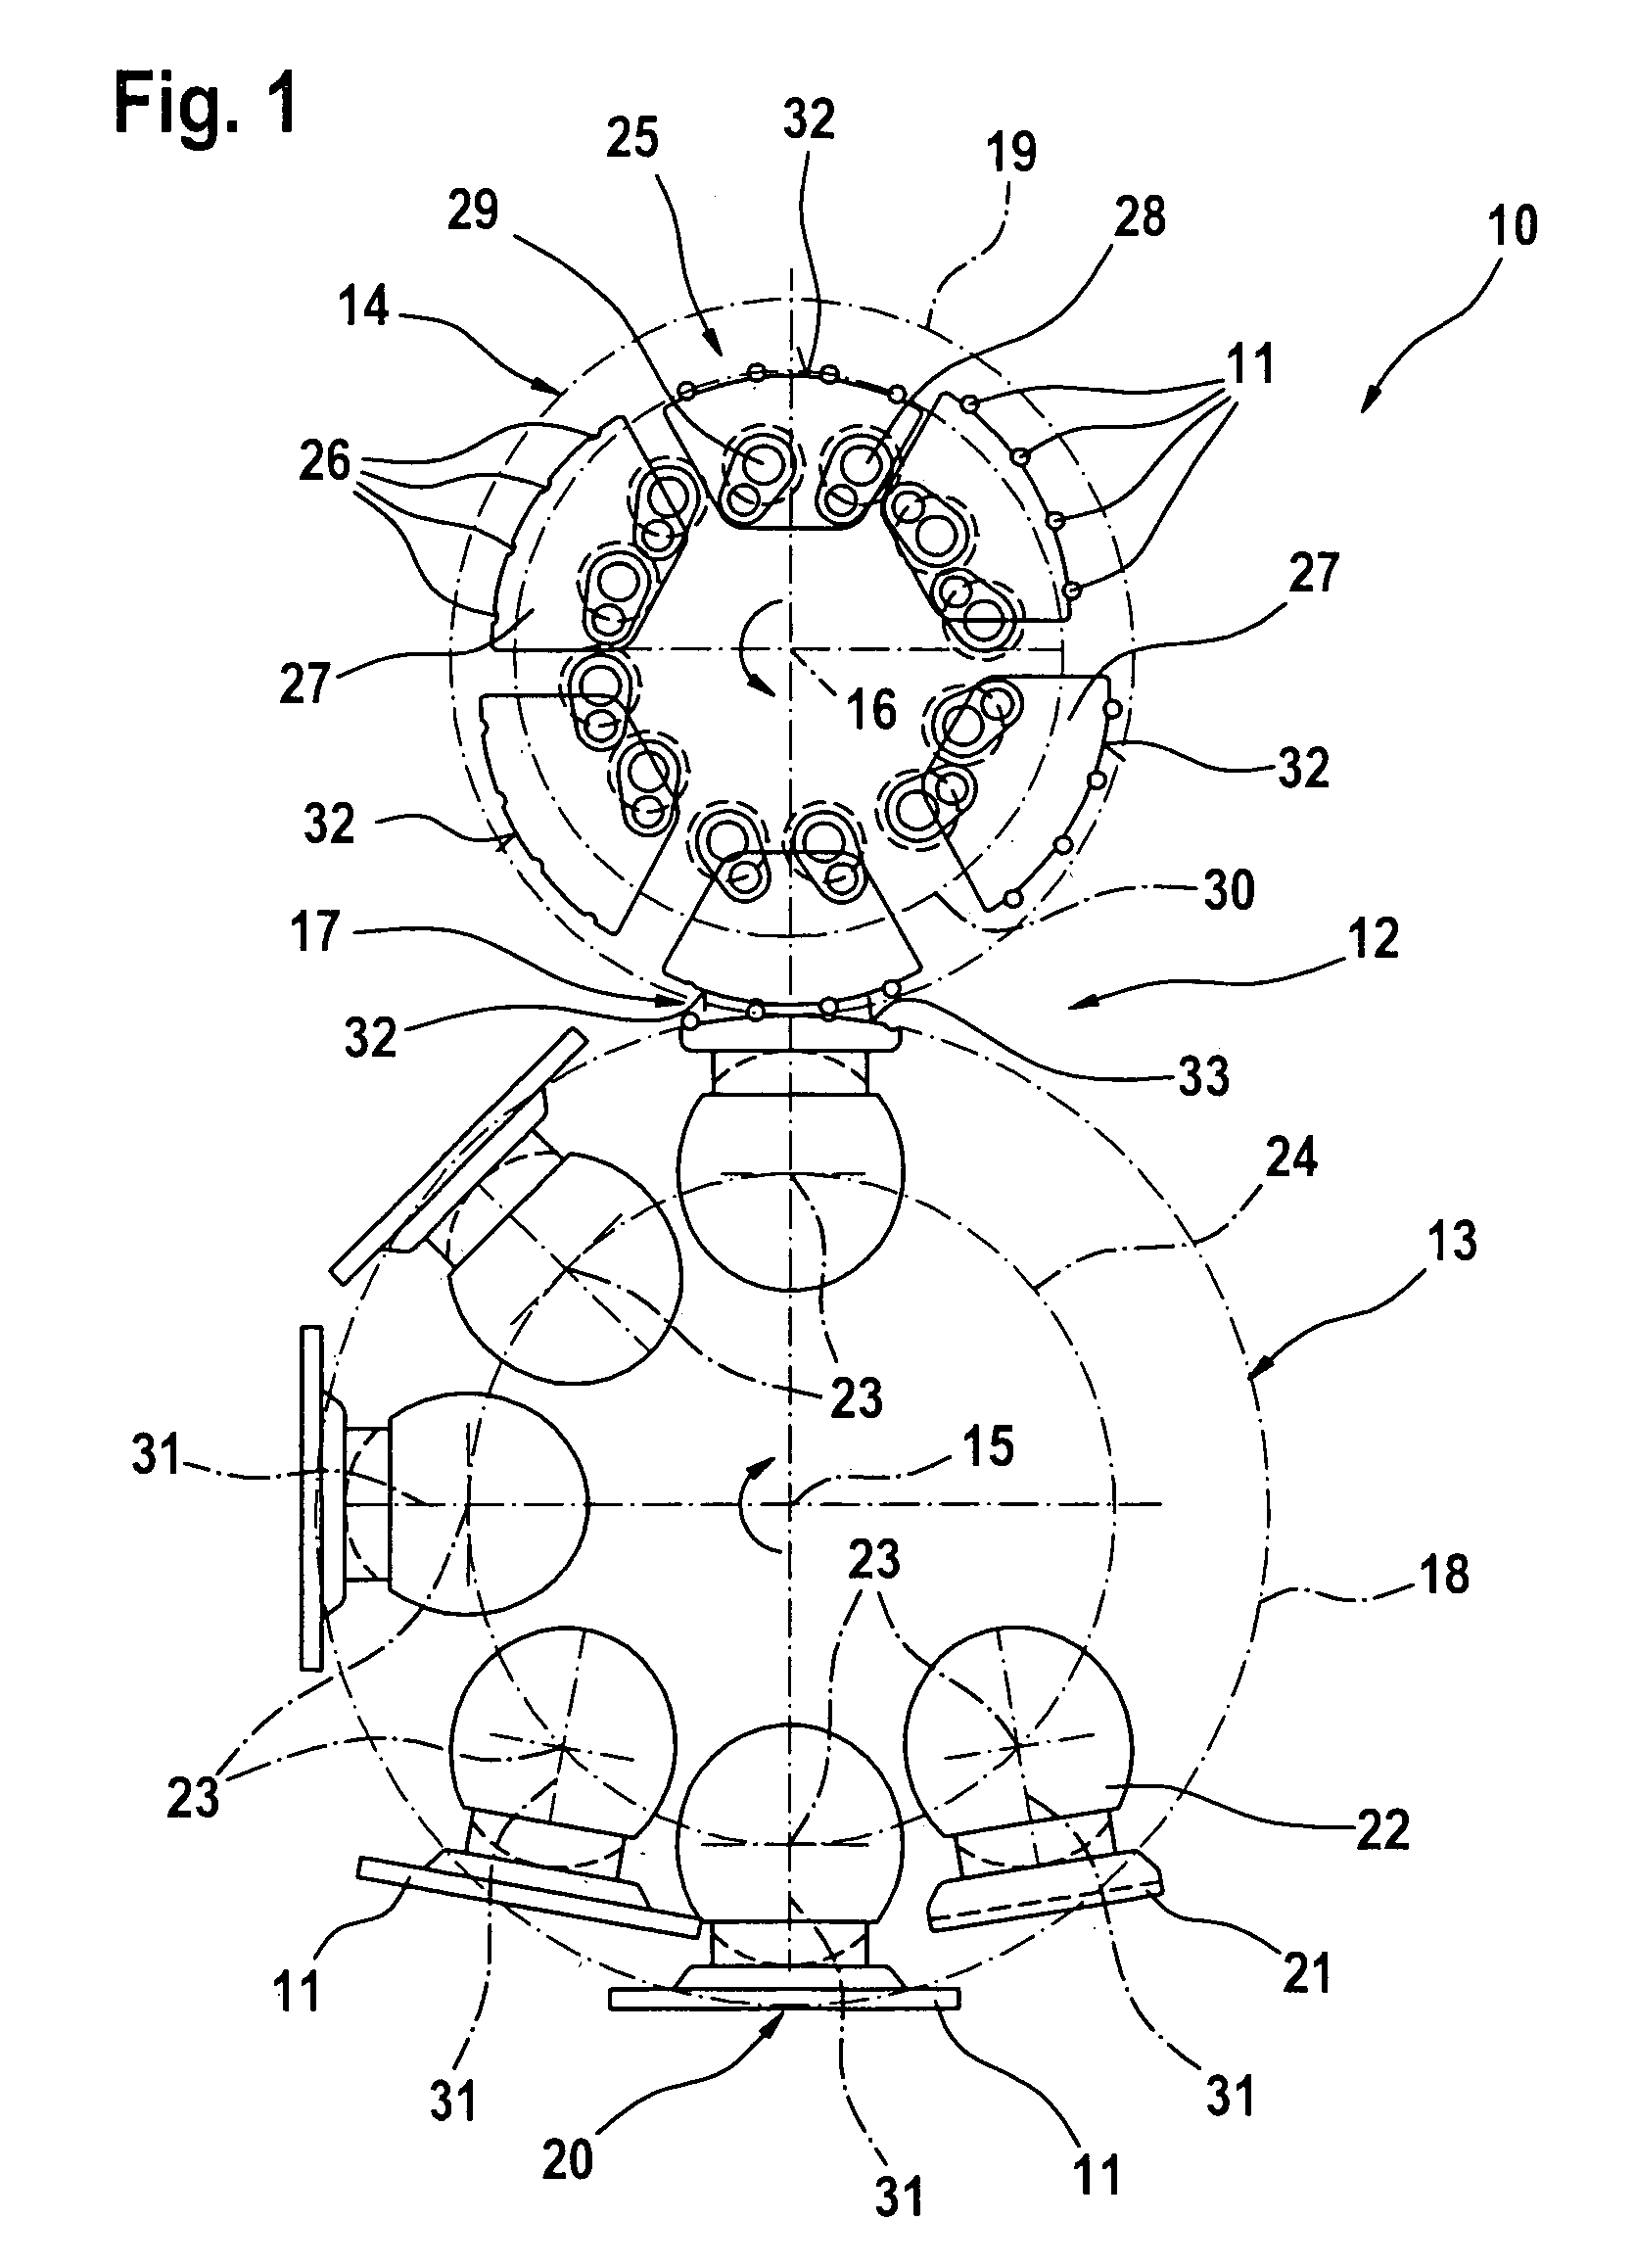 Apparatus and method for the delivery of rod-shaped articles